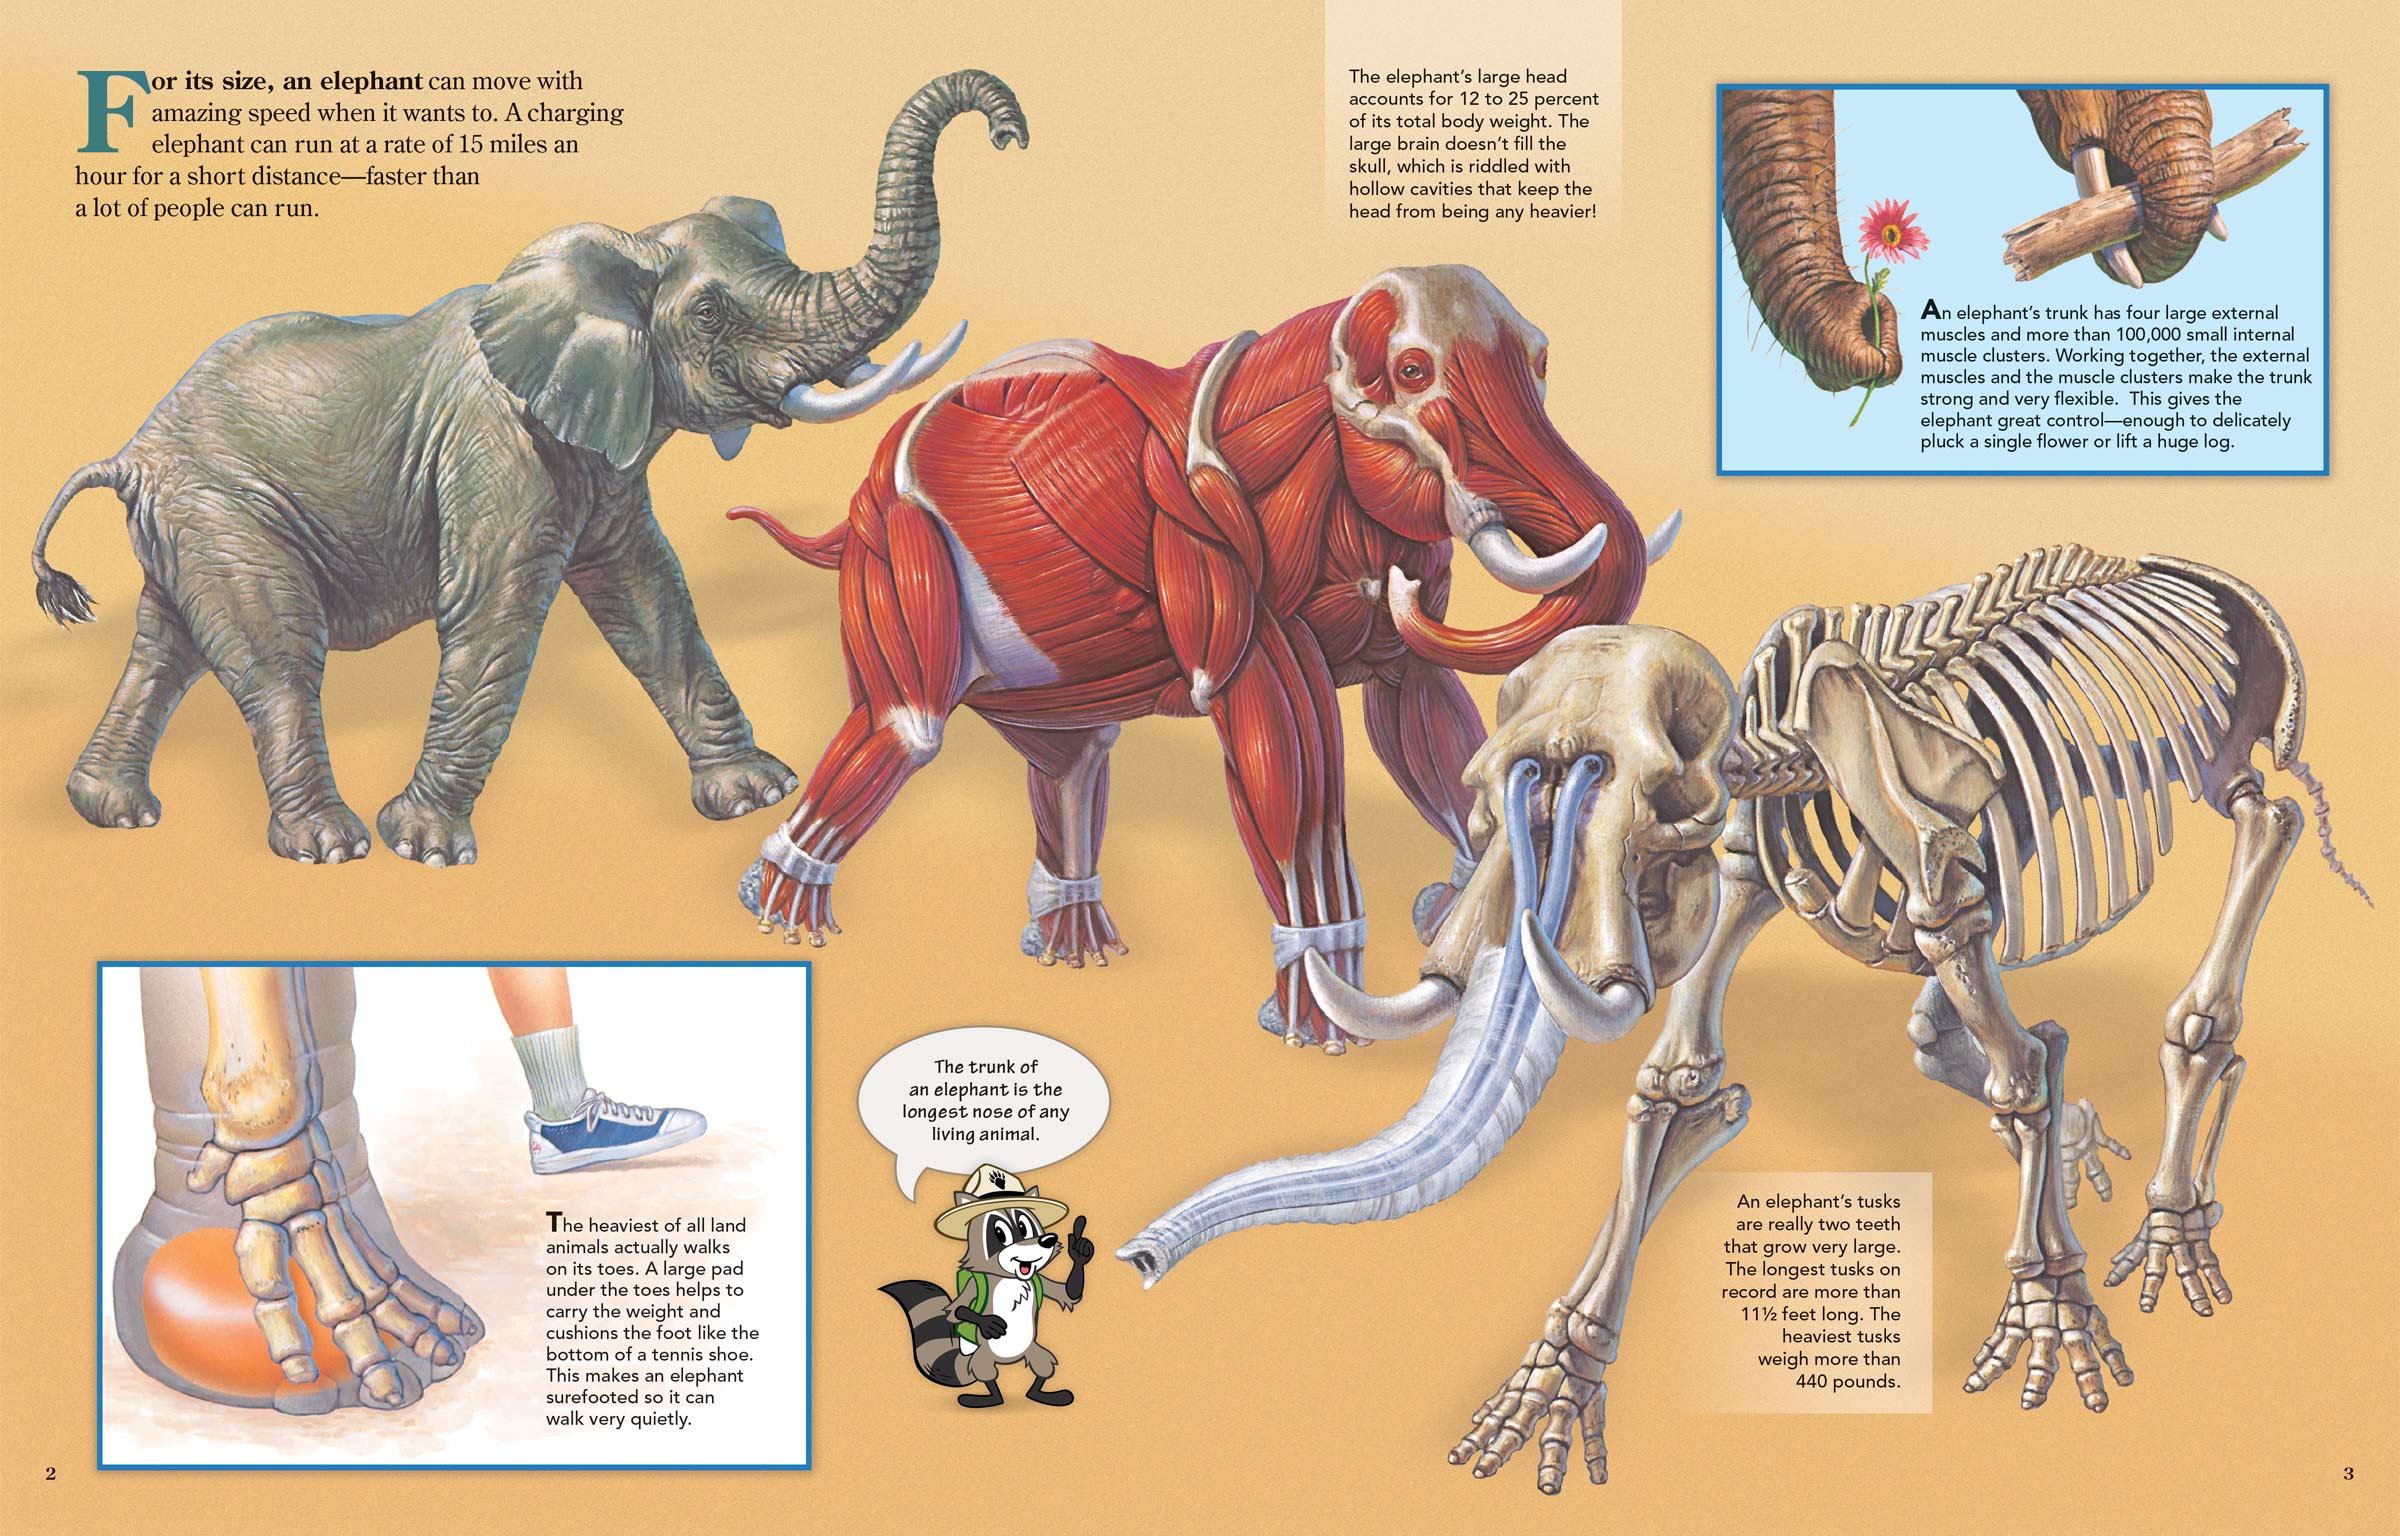 Elephant anatomy, showing muscles and bones.